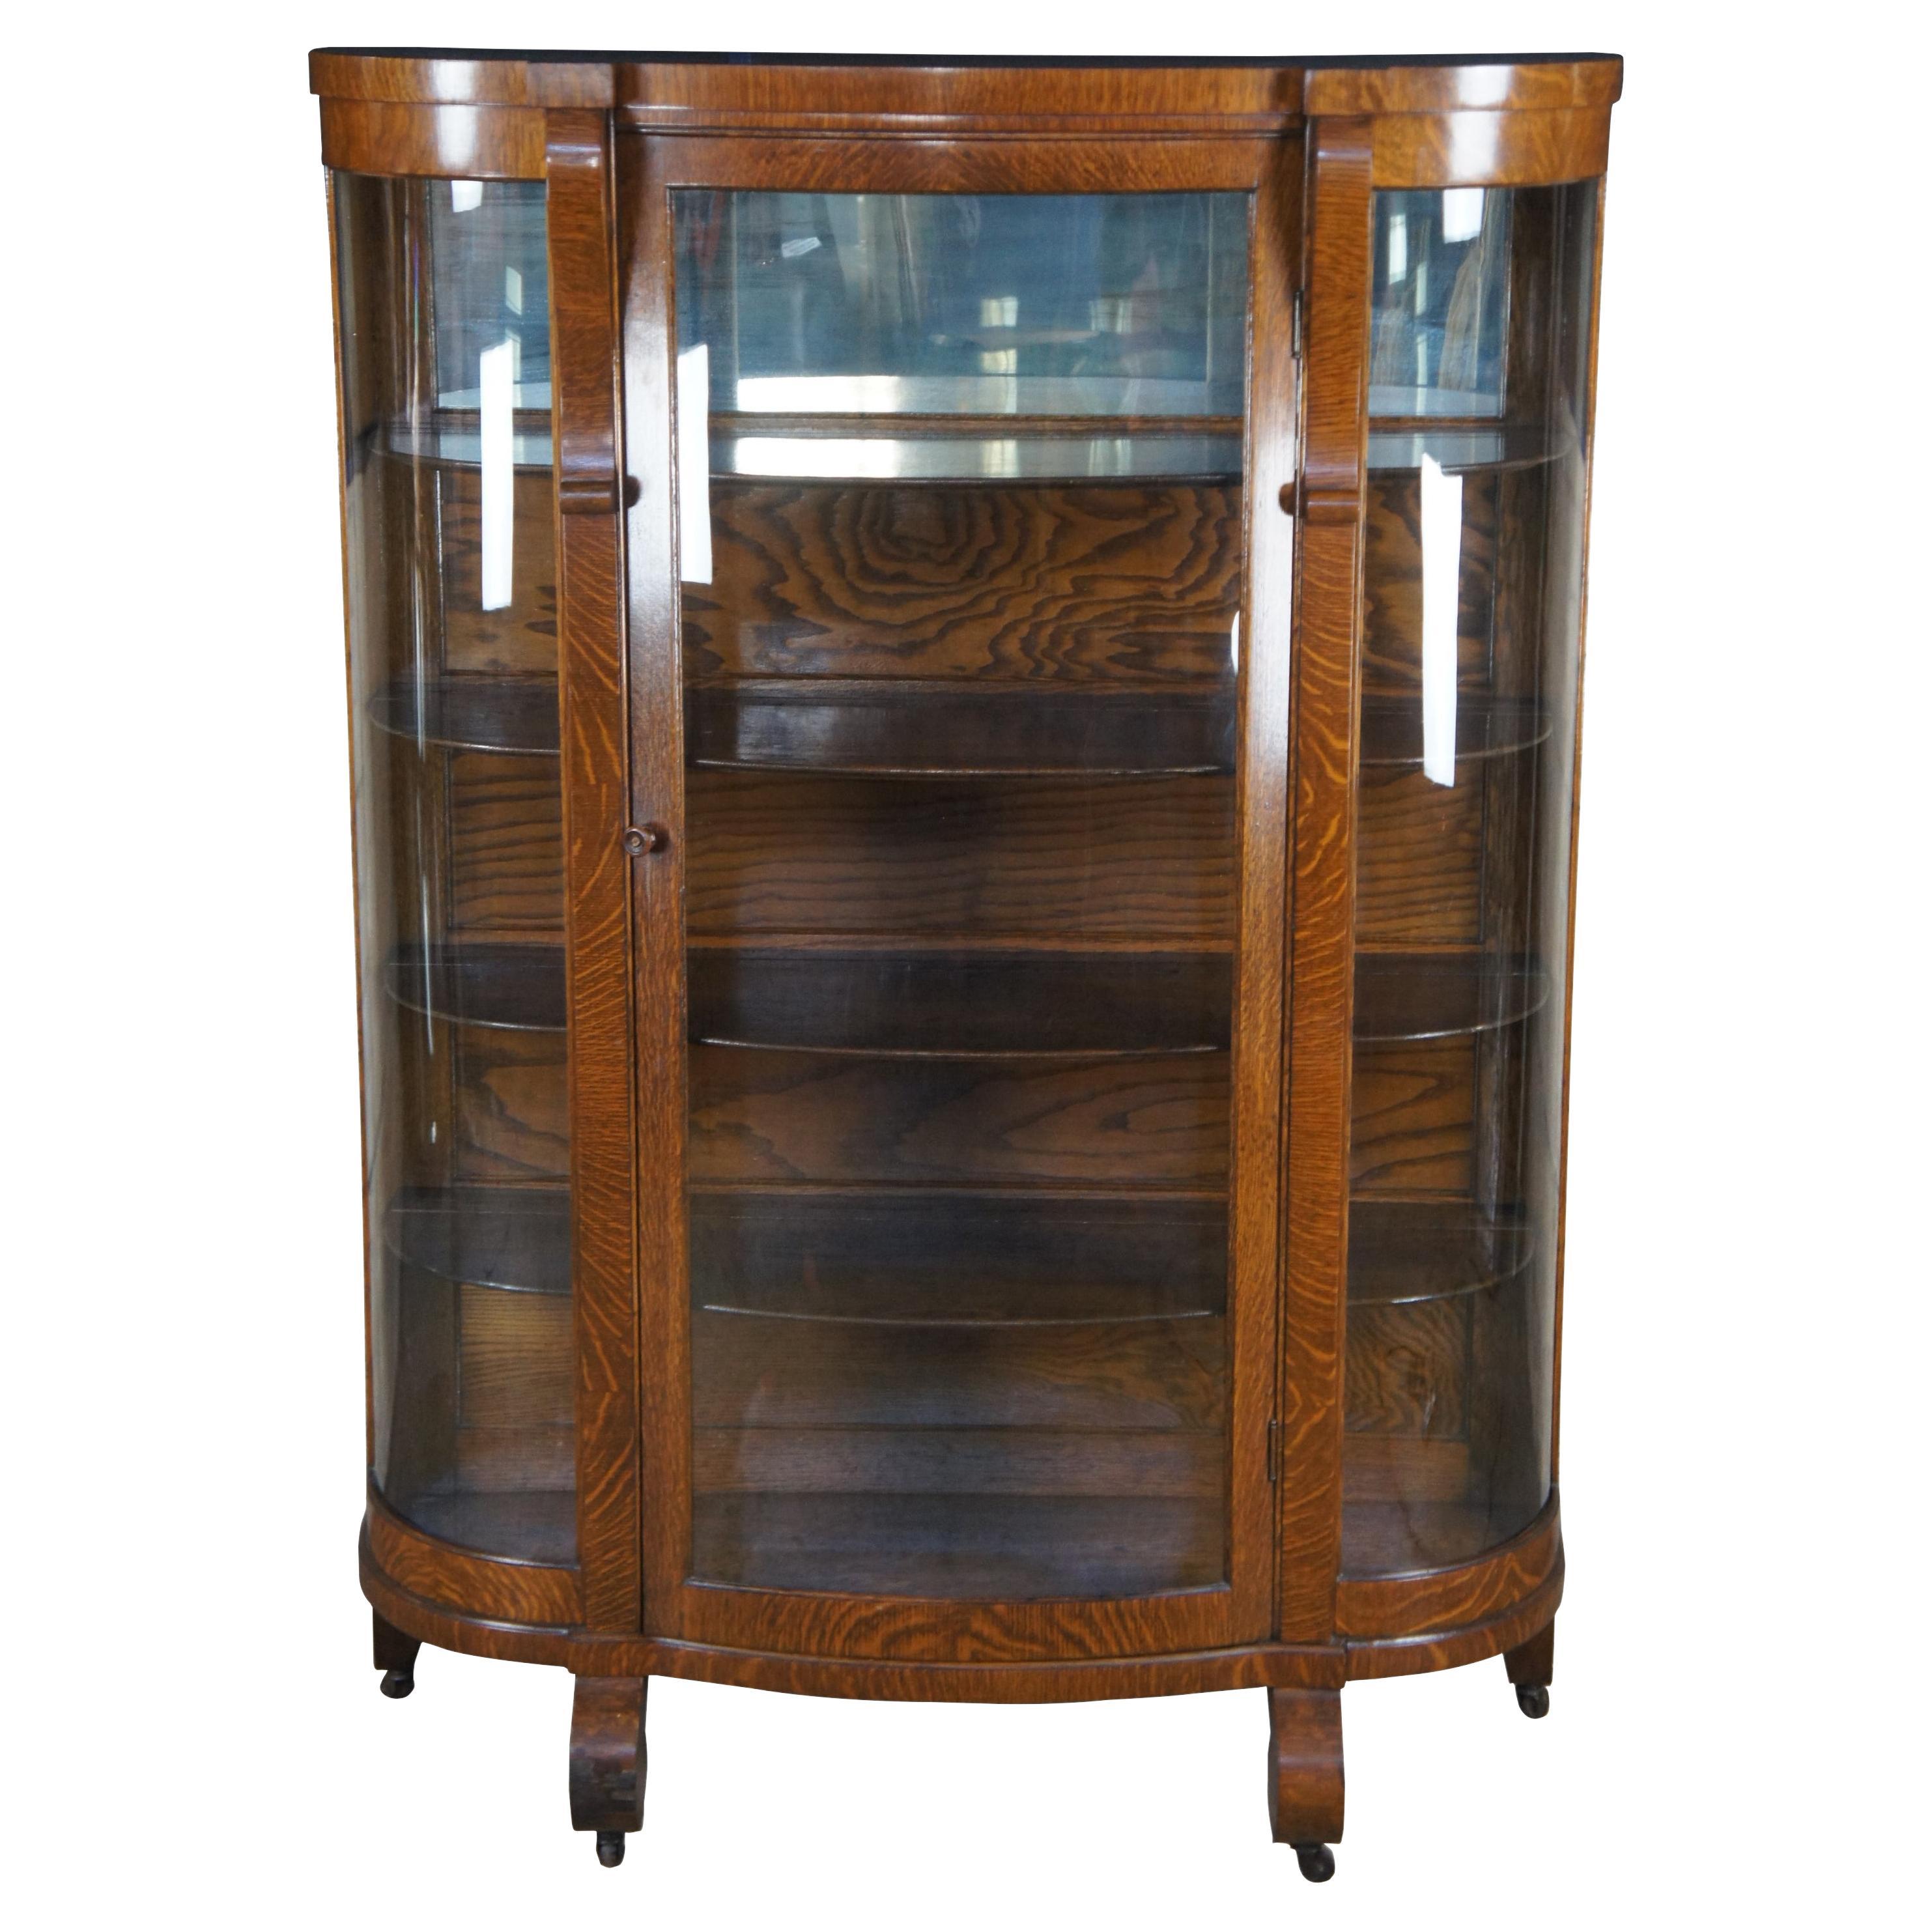 Antique American Empire Oak Curved Bowfront Glass Curio Display Cabinet Bookcase